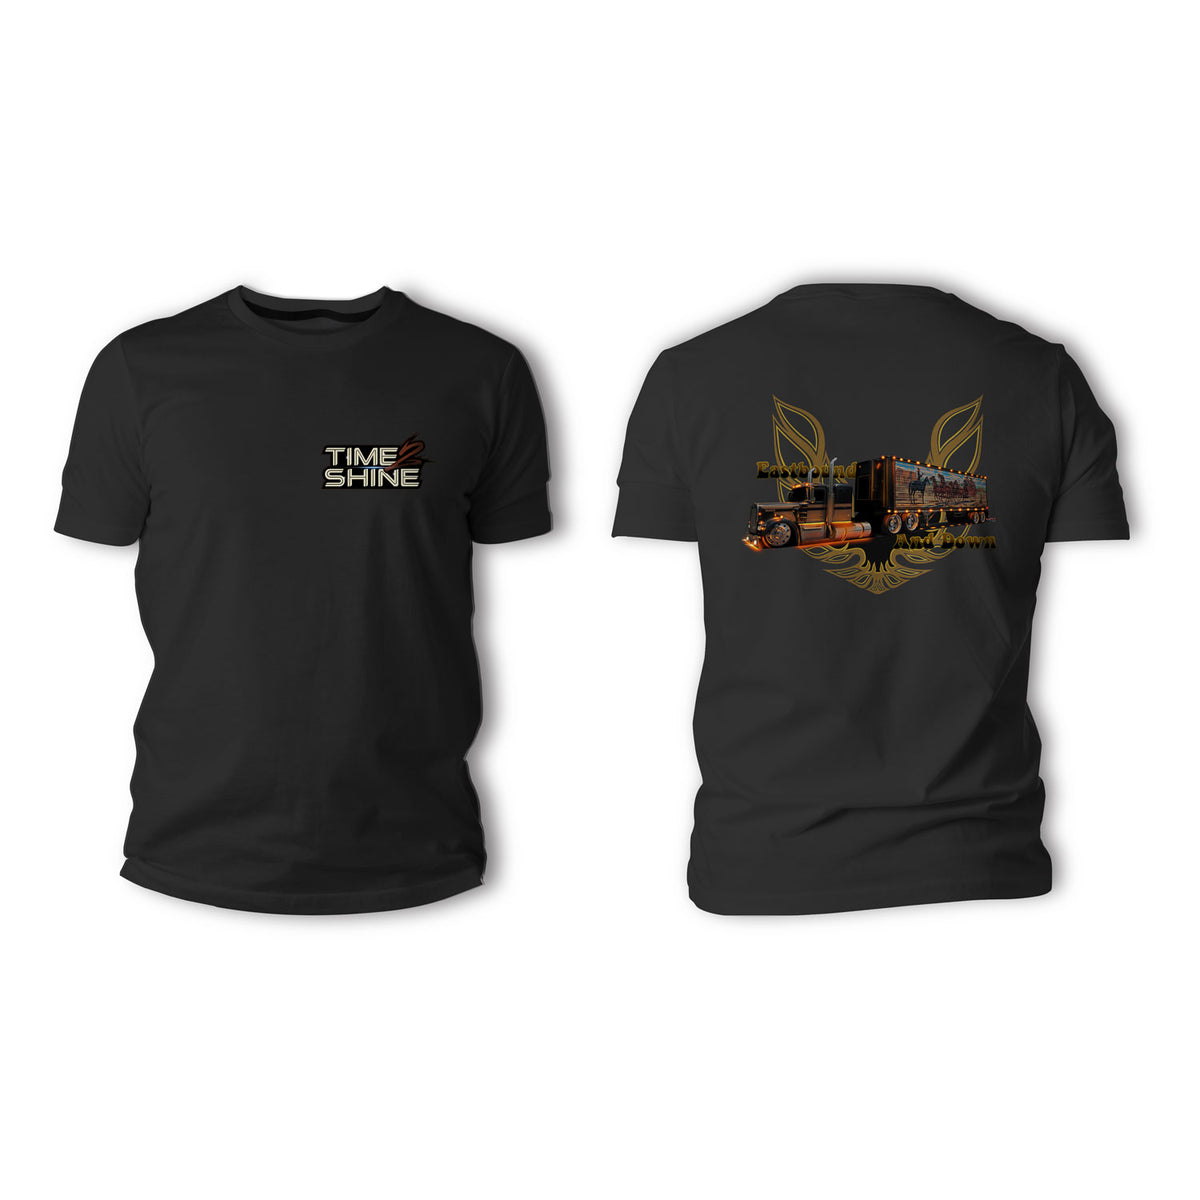 Eastbound and Down Shirts and Hoodies